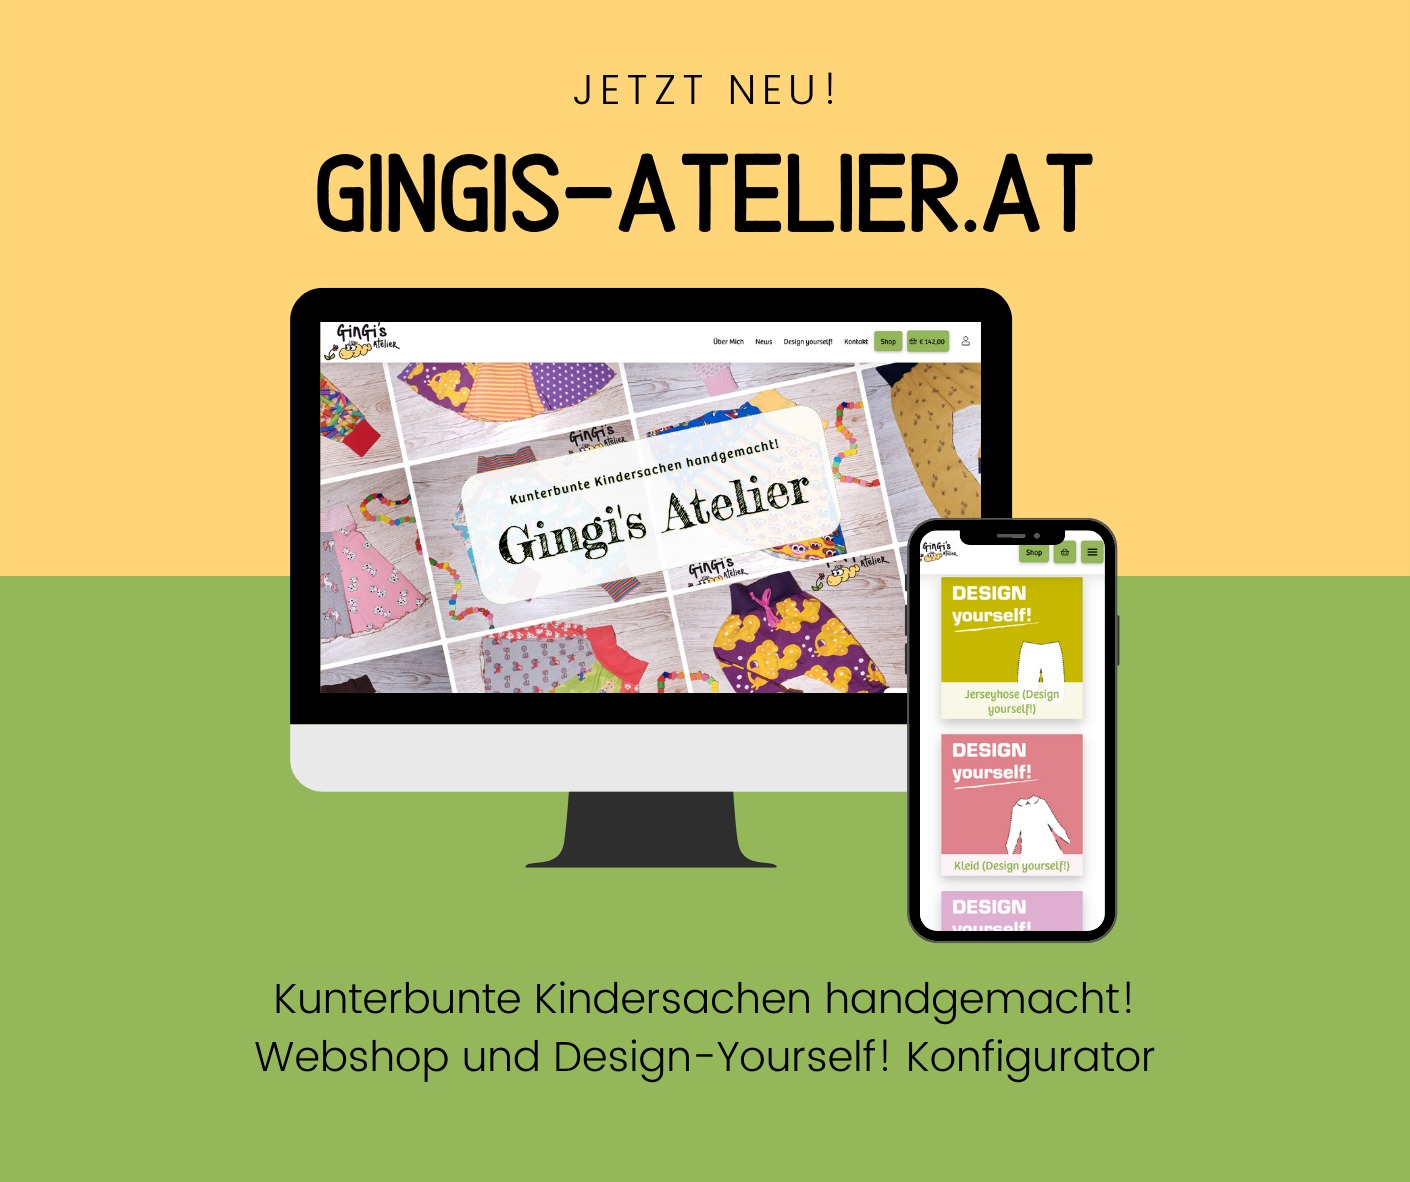 Featured image for “Gingi’s Atelier”